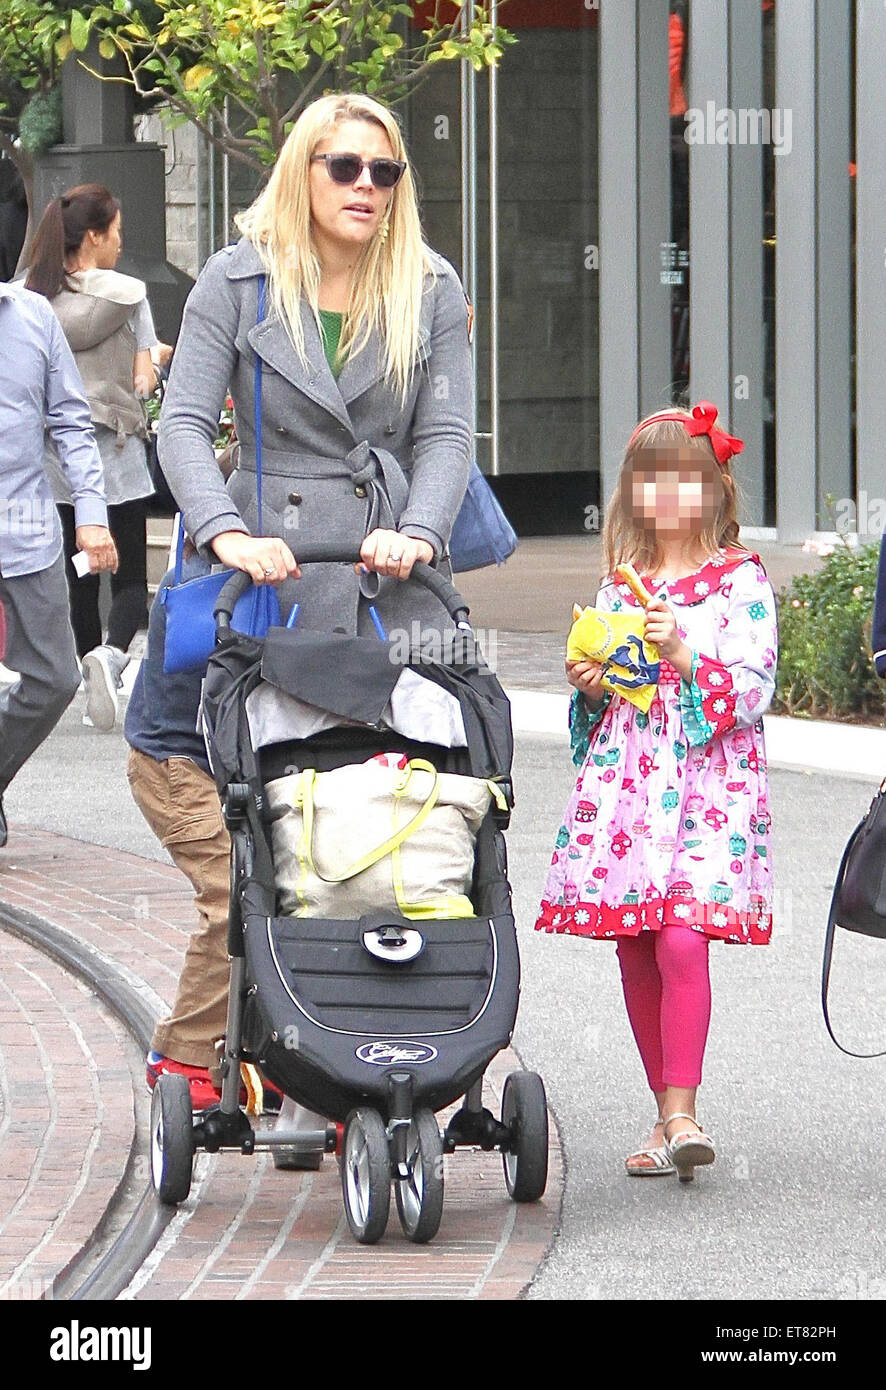 Busy Philipps spotted shopping at The Grove with her two daughters, Birdie and Cricket Silverstein  Featuring: Busy Philipps, Birdie Silverstein Where: Hollywood, California, United States When: 19 Dec 2014 Credit: WENN.com Stock Photo